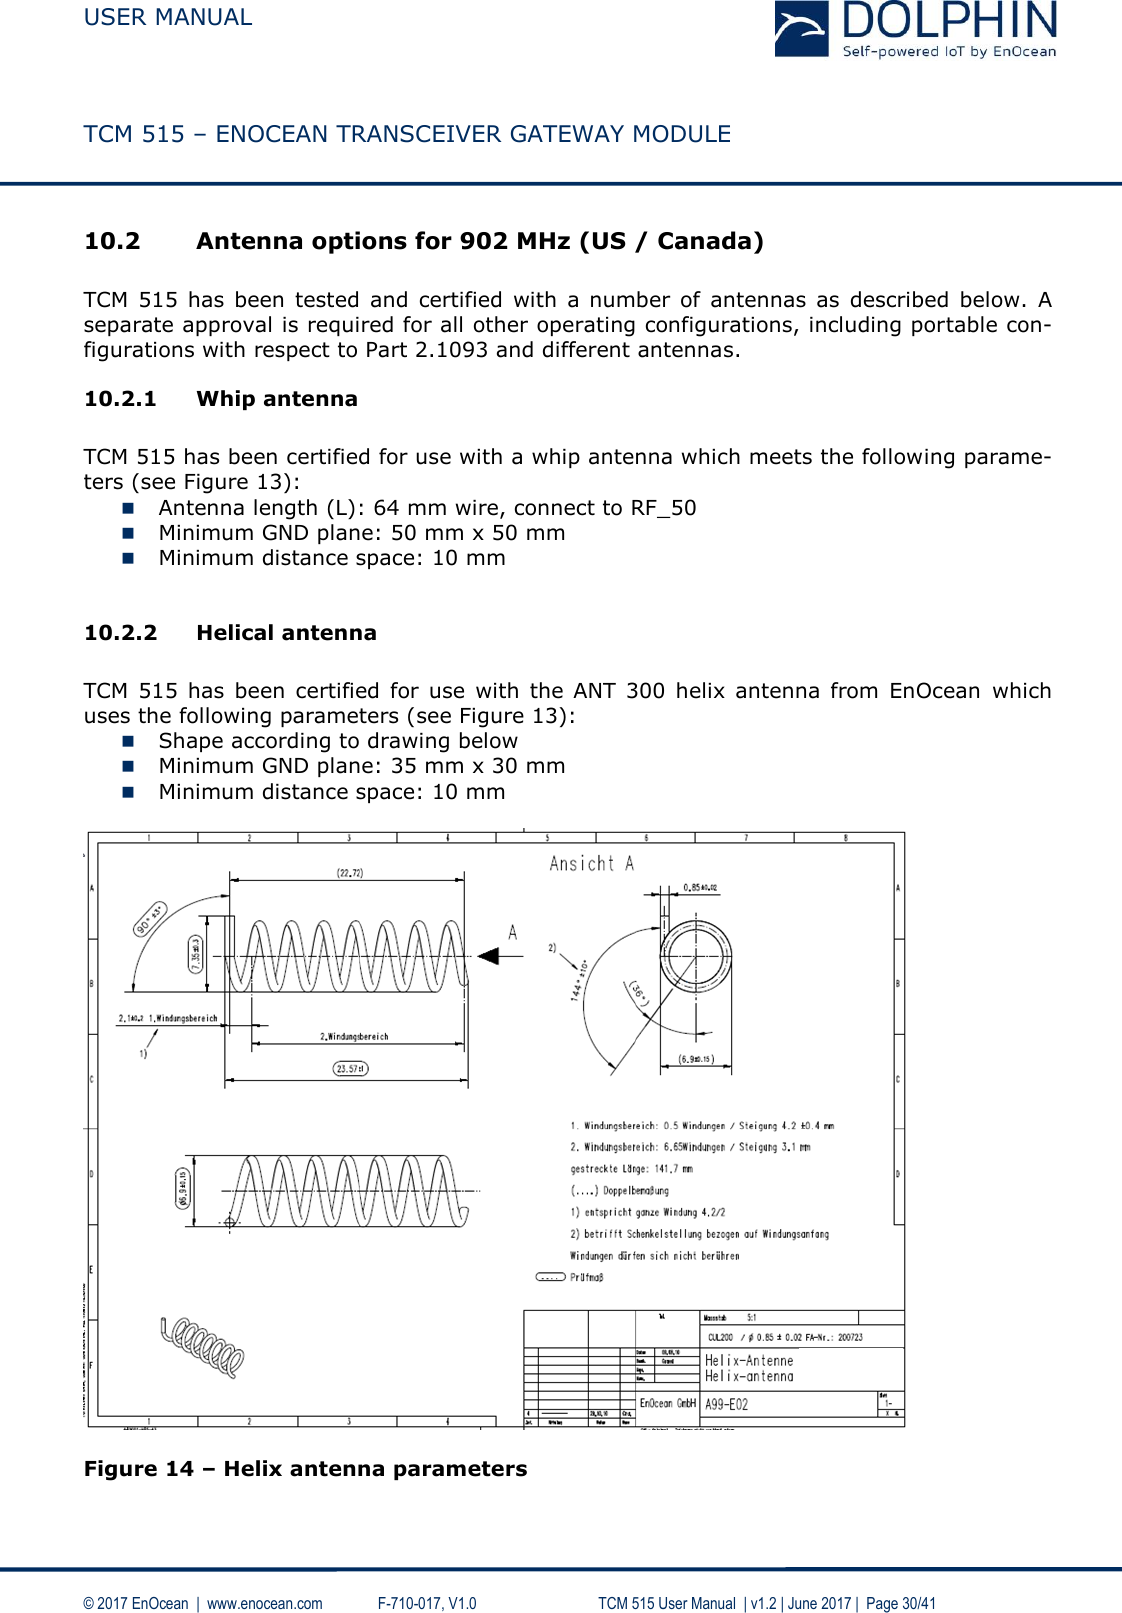  USER MANUAL    TCM 515 – ENOCEAN TRANSCEIVER GATEWAY MODULE  © 2017 EnOcean  |  www.enocean.com   F-710-017, V1.0        TCM 515 User Manual  | v1.2 | June 2017 |  Page 30/41  10.2 Antenna options for 902 MHz (US / Canada)  TCM  515  has  been tested  and  certified  with a  number  of  antennas  as  described  below.  A separate approval is required for all other operating configurations, including portable con-figurations with respect to Part 2.1093 and different antennas. 10.2.1 Whip antenna  TCM 515 has been certified for use with a whip antenna which meets the following parame-ters (see Figure 13):   Antenna length (L): 64 mm wire, connect to RF_50   Minimum GND plane: 50 mm x 50 mm  Minimum distance space: 10 mm  10.2.2 Helical antenna  TCM  515  has  been  certified  for  use  with the ANT  300  helix  antenna from  EnOcean  which uses the following parameters (see Figure 13):   Shape according to drawing below  Minimum GND plane: 35 mm x 30 mm  Minimum distance space: 10 mm    Figure 14 – Helix antenna parameters  